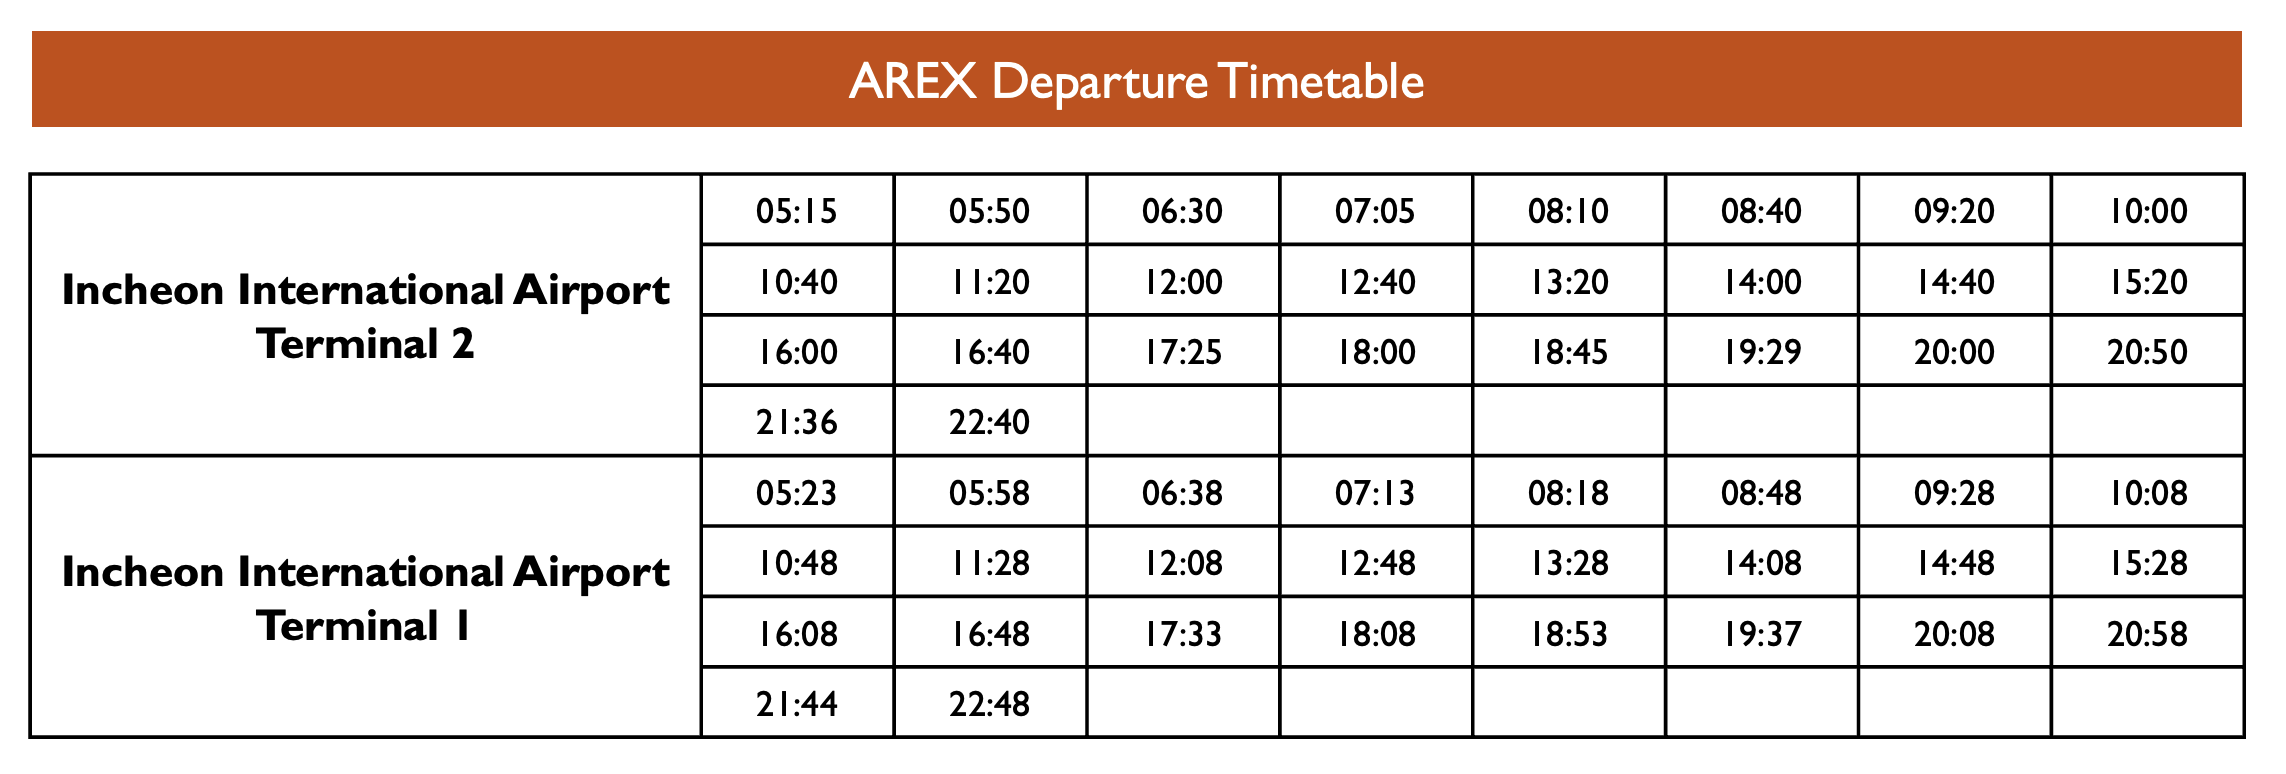 AREX (Airport Railroad Express) Departure Timetable